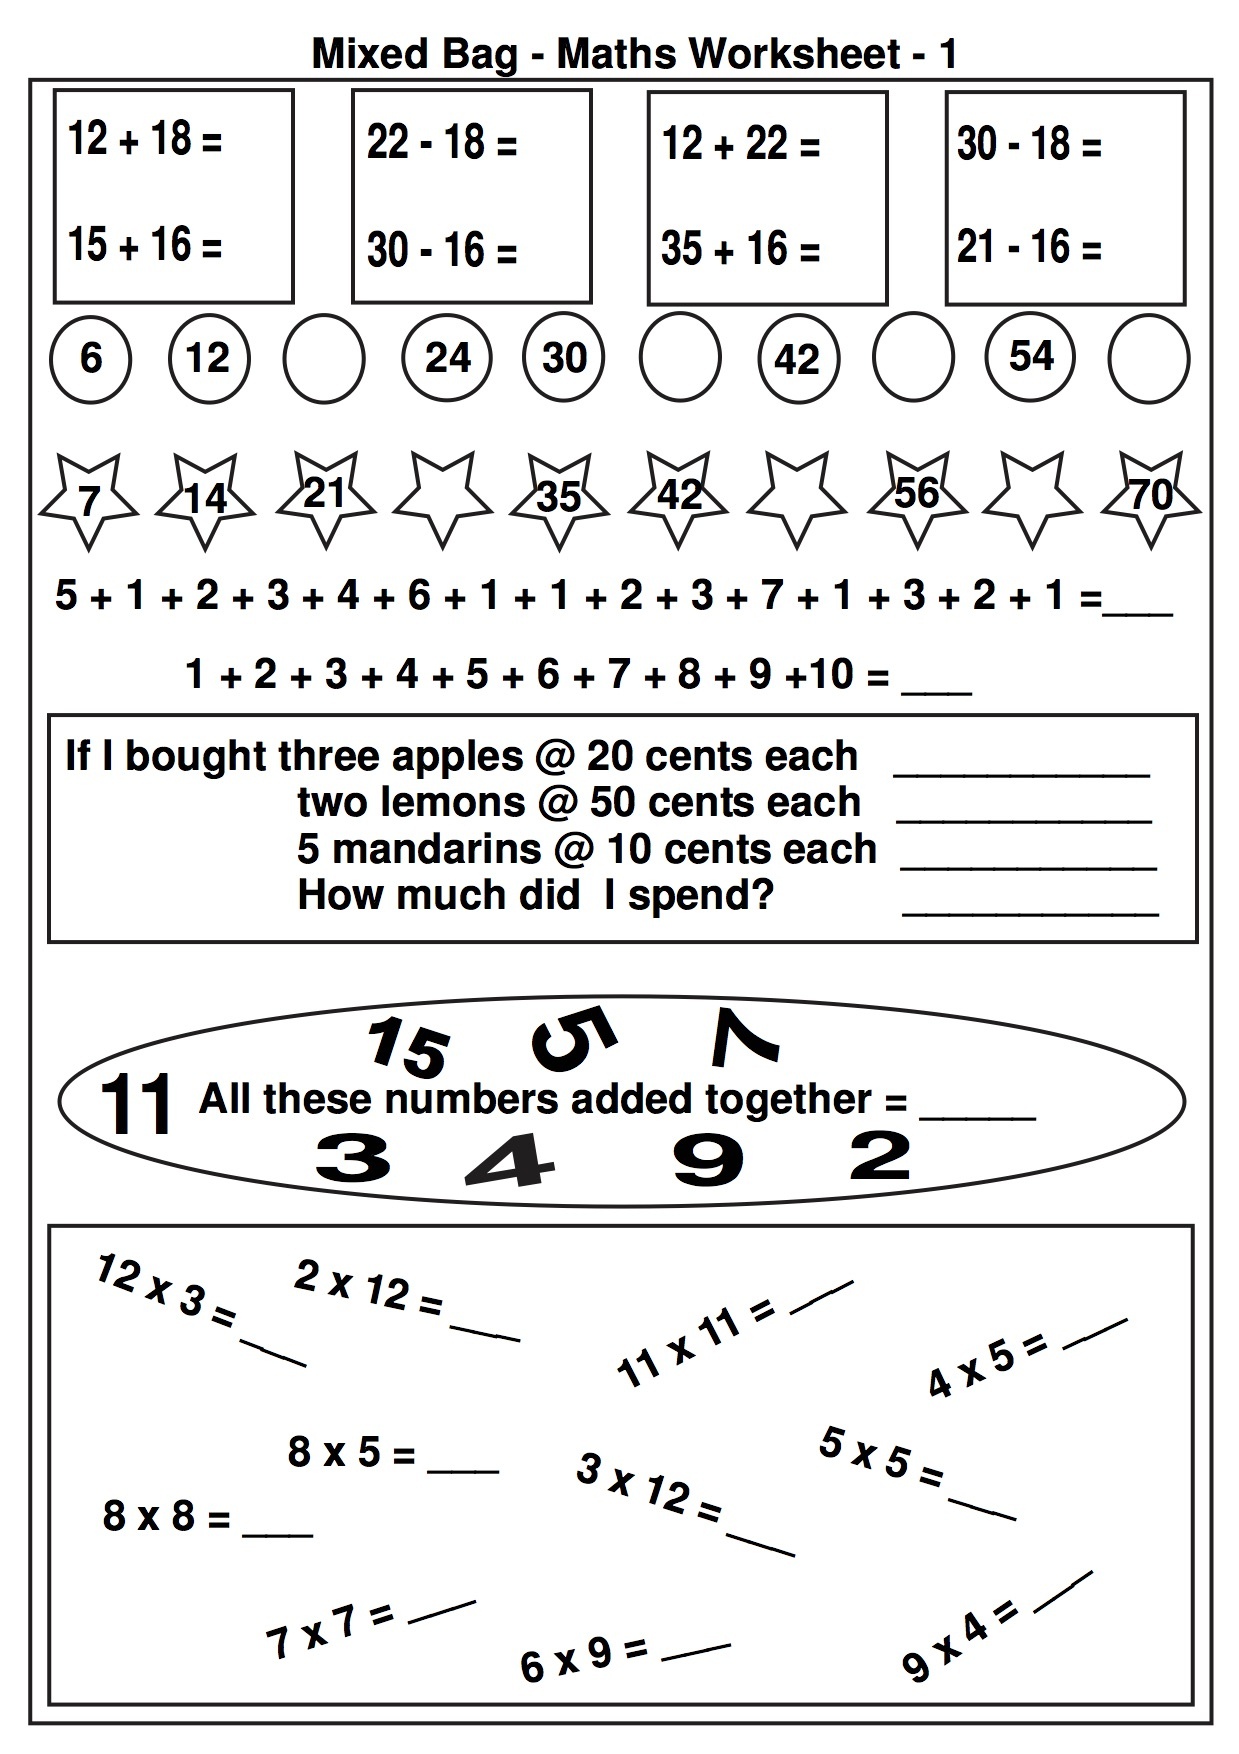 Free Math Worksheets And Printable Math Activities For Elementary - Free Printable Math Worksheets For Adults